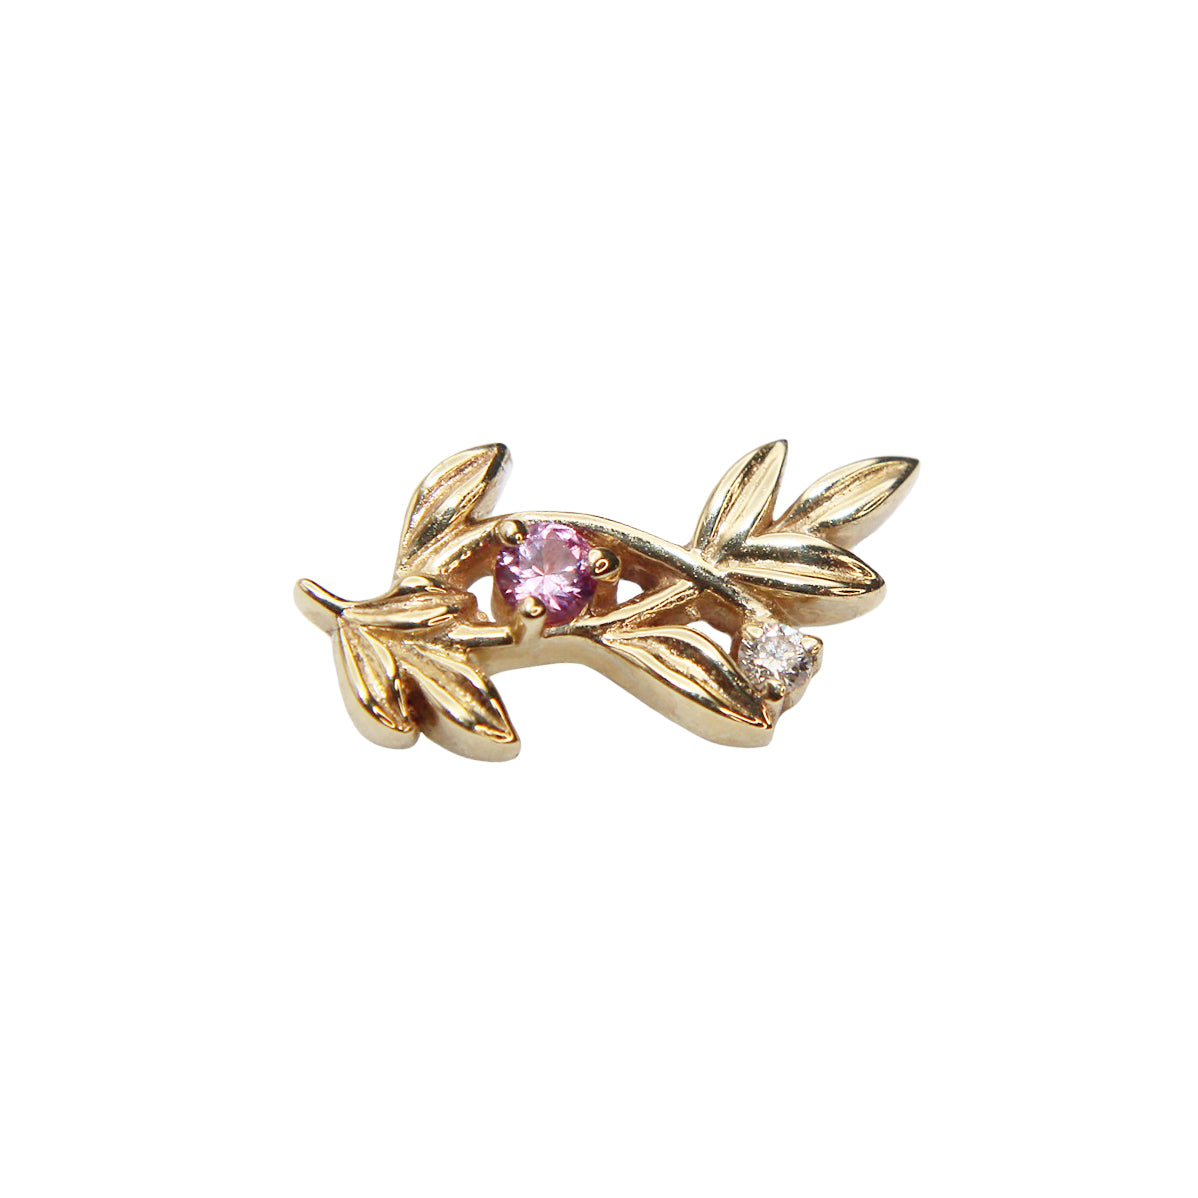 BVLA's "Jessamine" in 14k Yellow gold with 1 pink sapphire and 1 smaller diamond